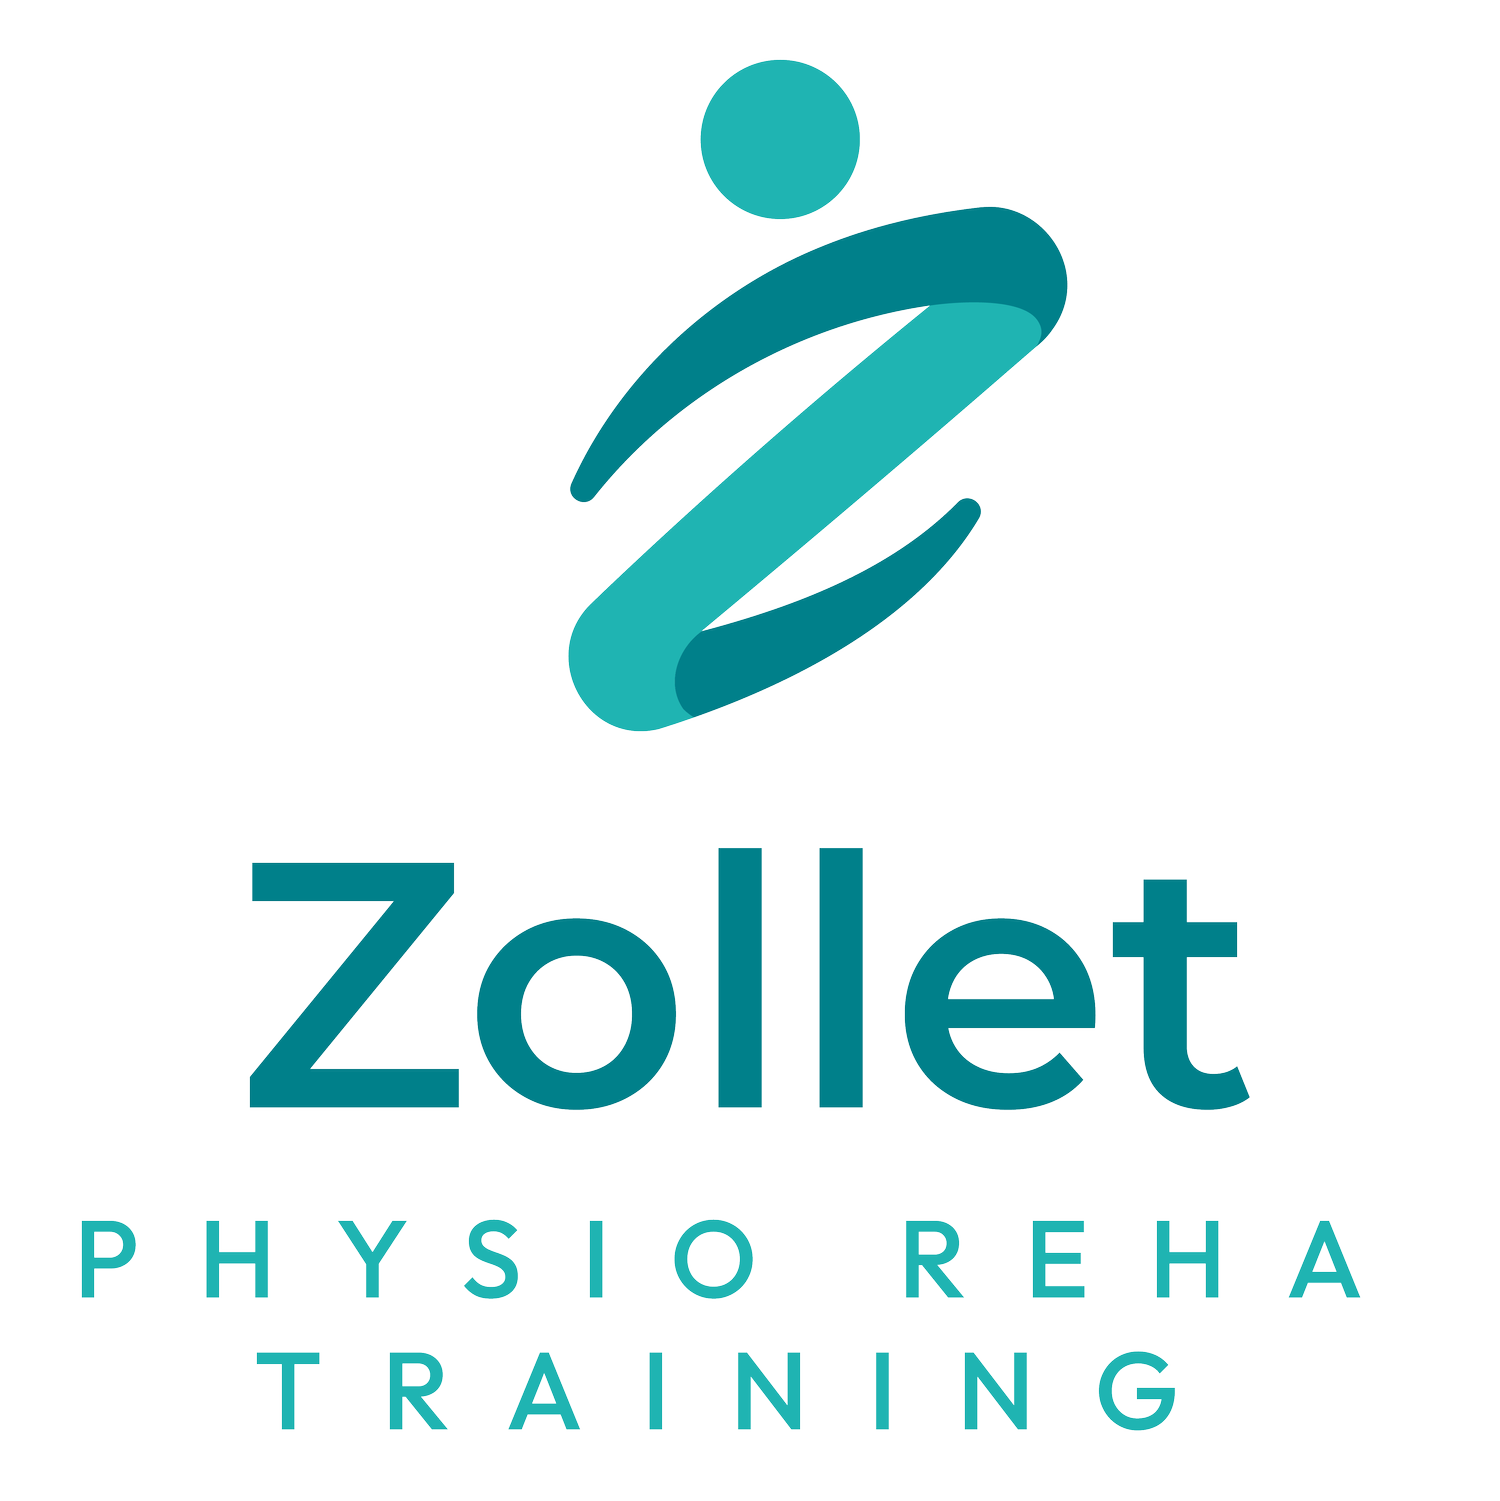 Physiotherapie Zollet